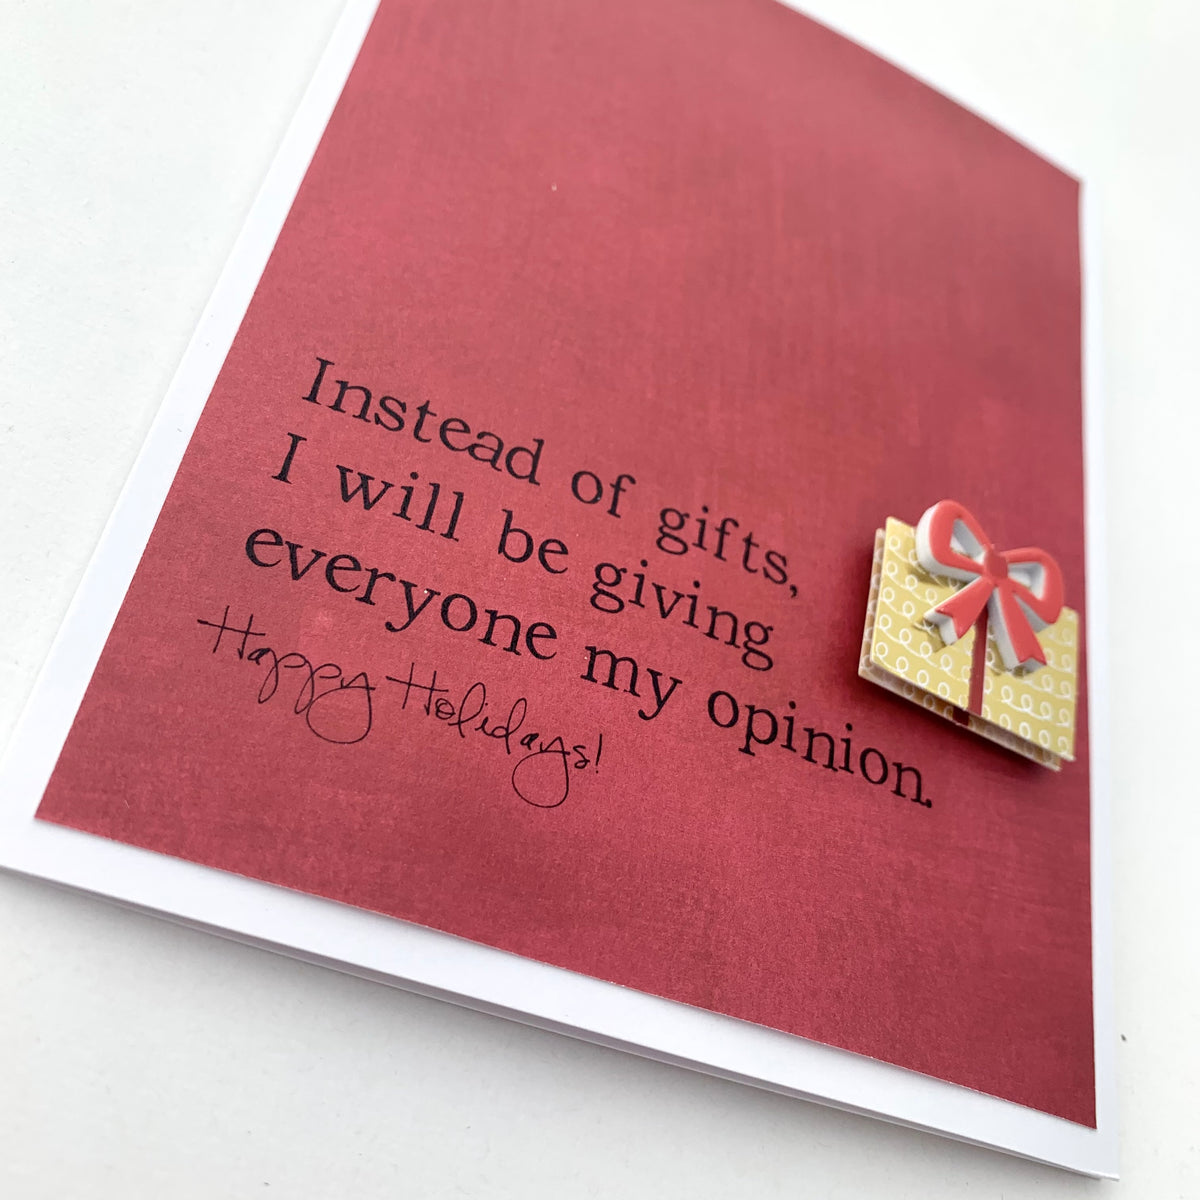 Holiday Instead of Gifts Giving my Opinion card